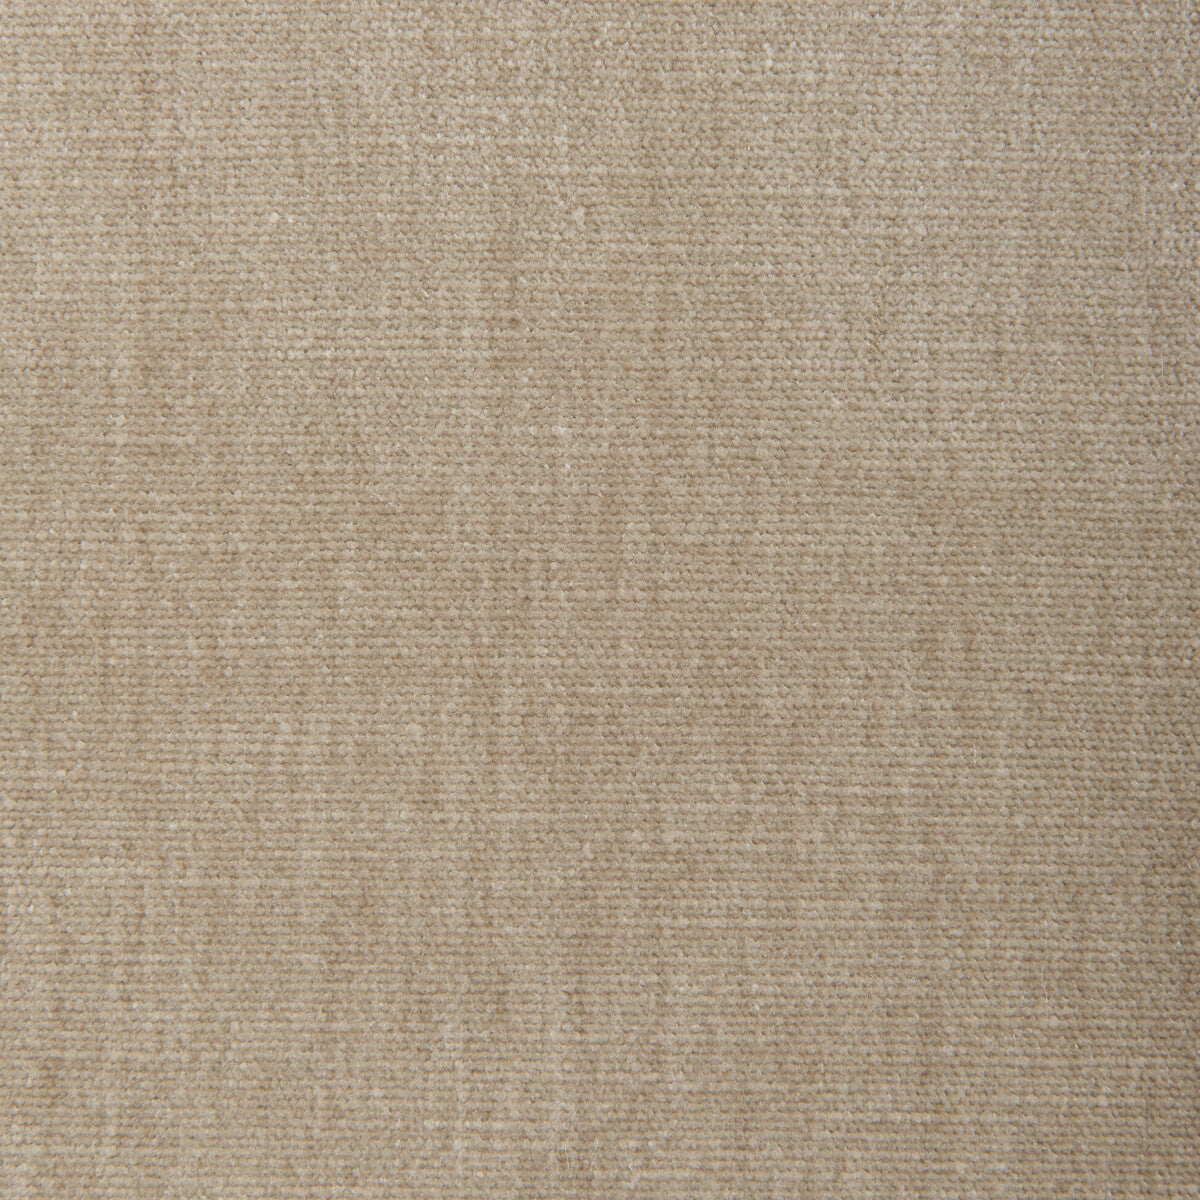 Kravet Smart fabric in 36076-1101 color - pattern 36076.1101.0 - by Kravet Smart in the Sumptuous Chenille II collection